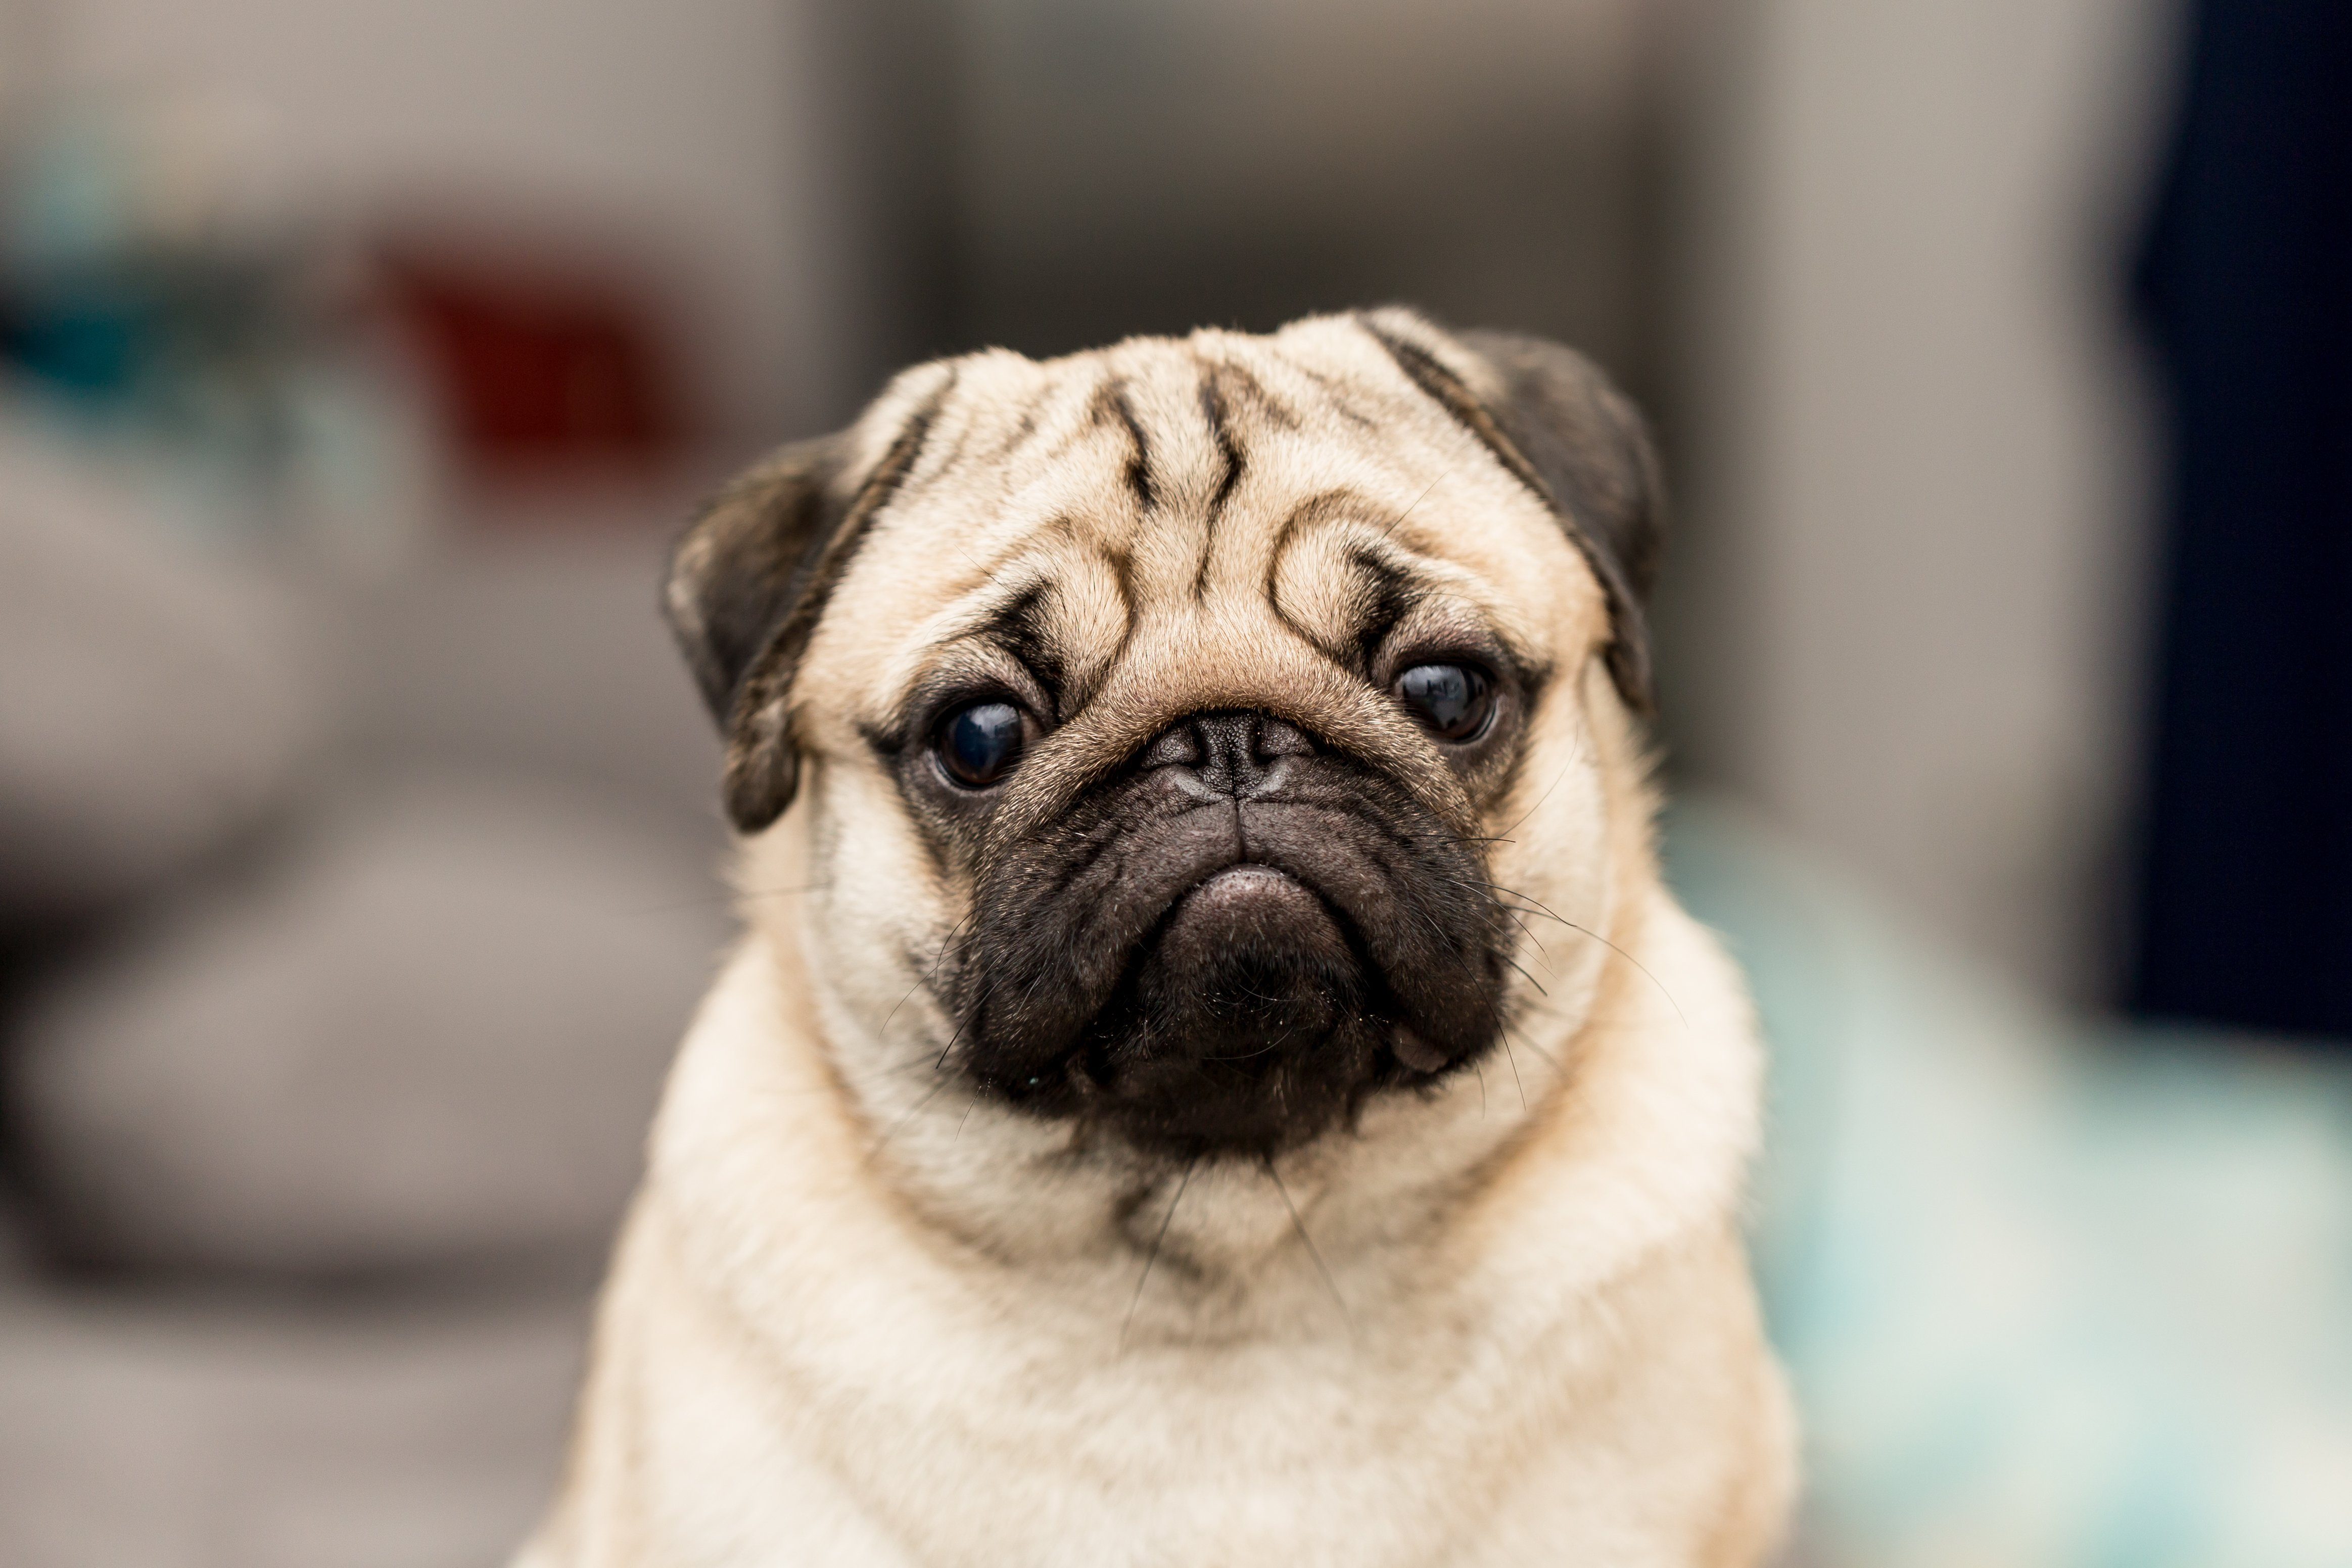 cute dog pug breed have a question and making funny face feeling so happiness and fun,Selective focus,Dog Friendly Concept